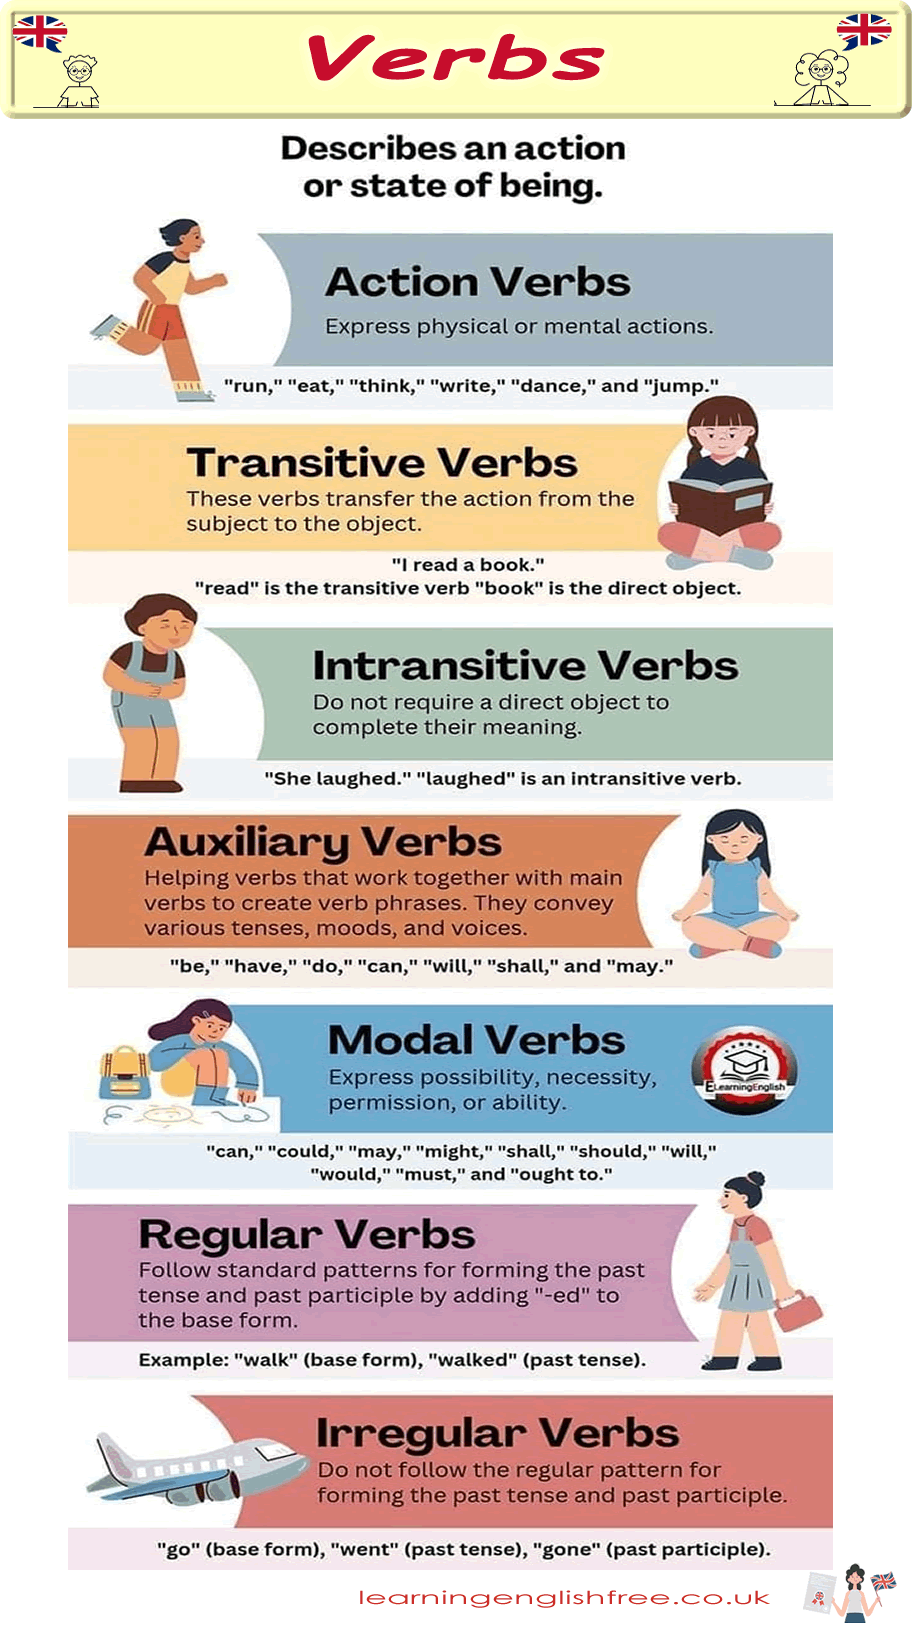 A comprehensive guide on different types of verbs in English, including action, auxiliary, modal, transitive, intransitive, regular, and irregular verbs, designed for ESL learners.